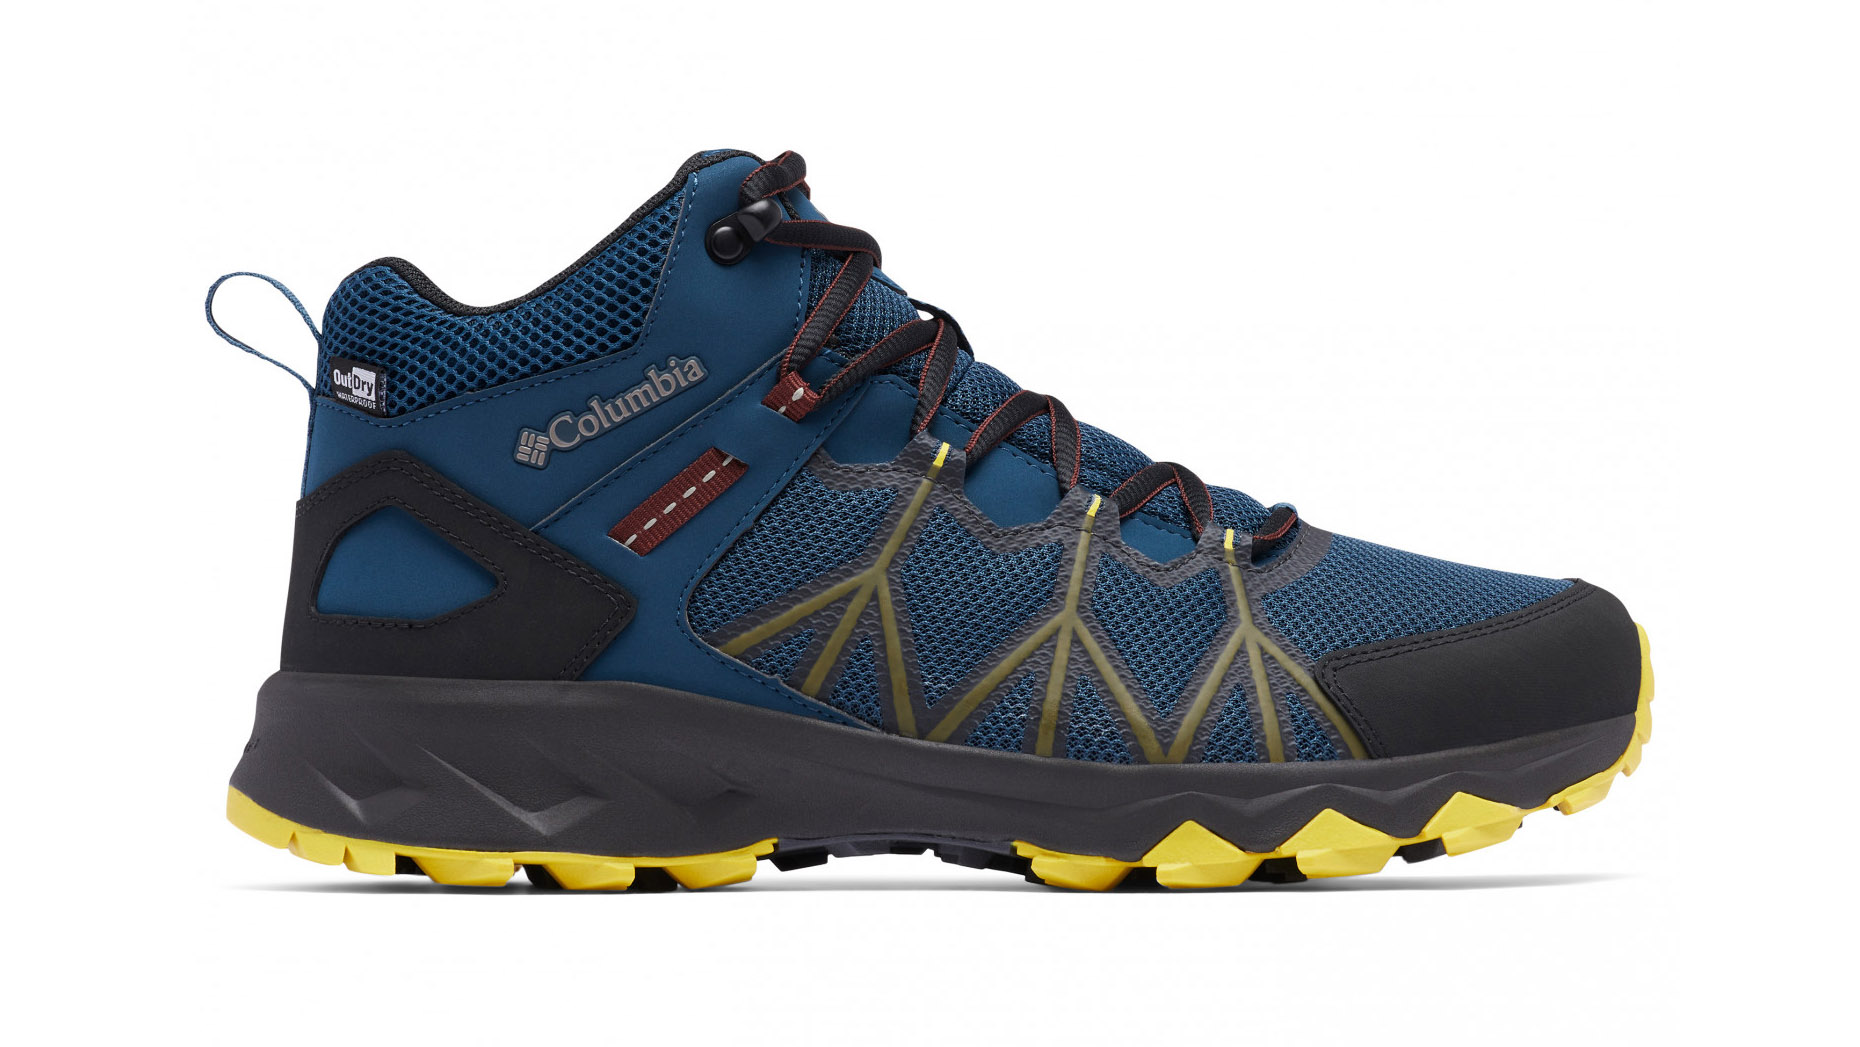 Columbia Peakfreak II Outdry Waterproof Walking Shoe: a great fitting shoe  that's ideal for day hikes